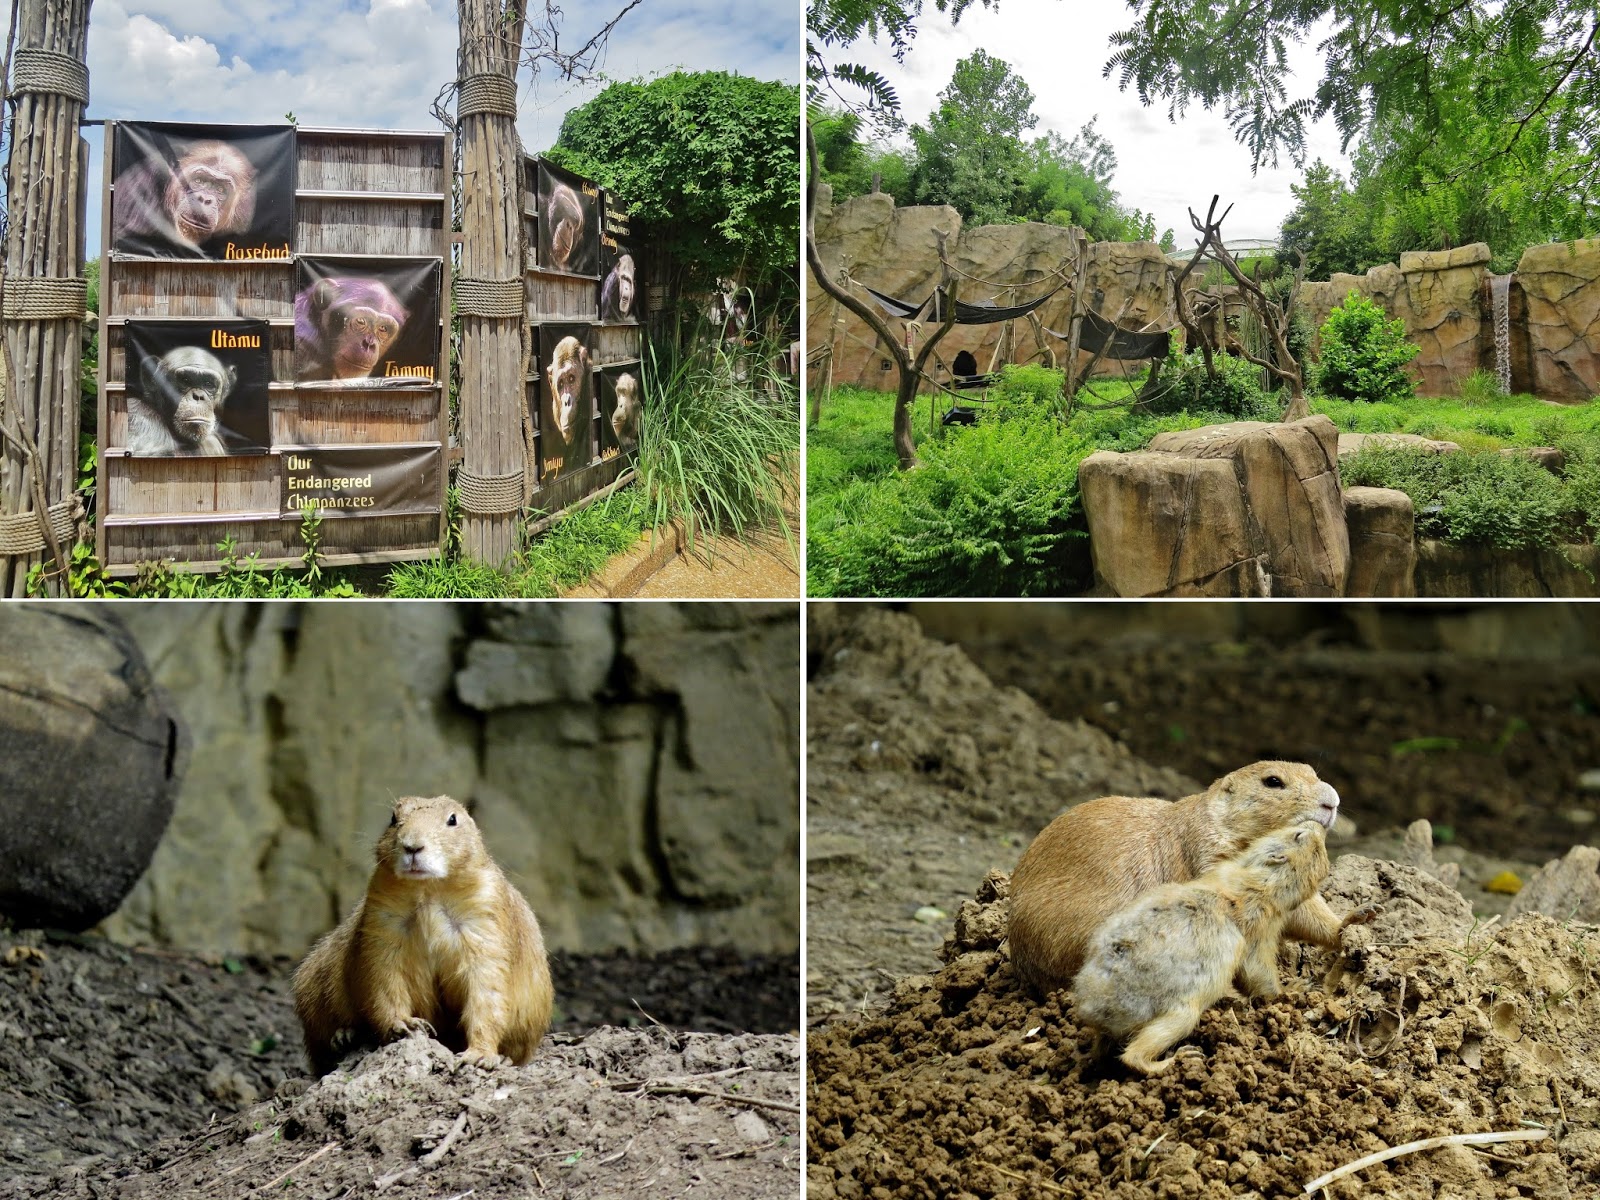 Liberty or Death: St. Louis Zoo